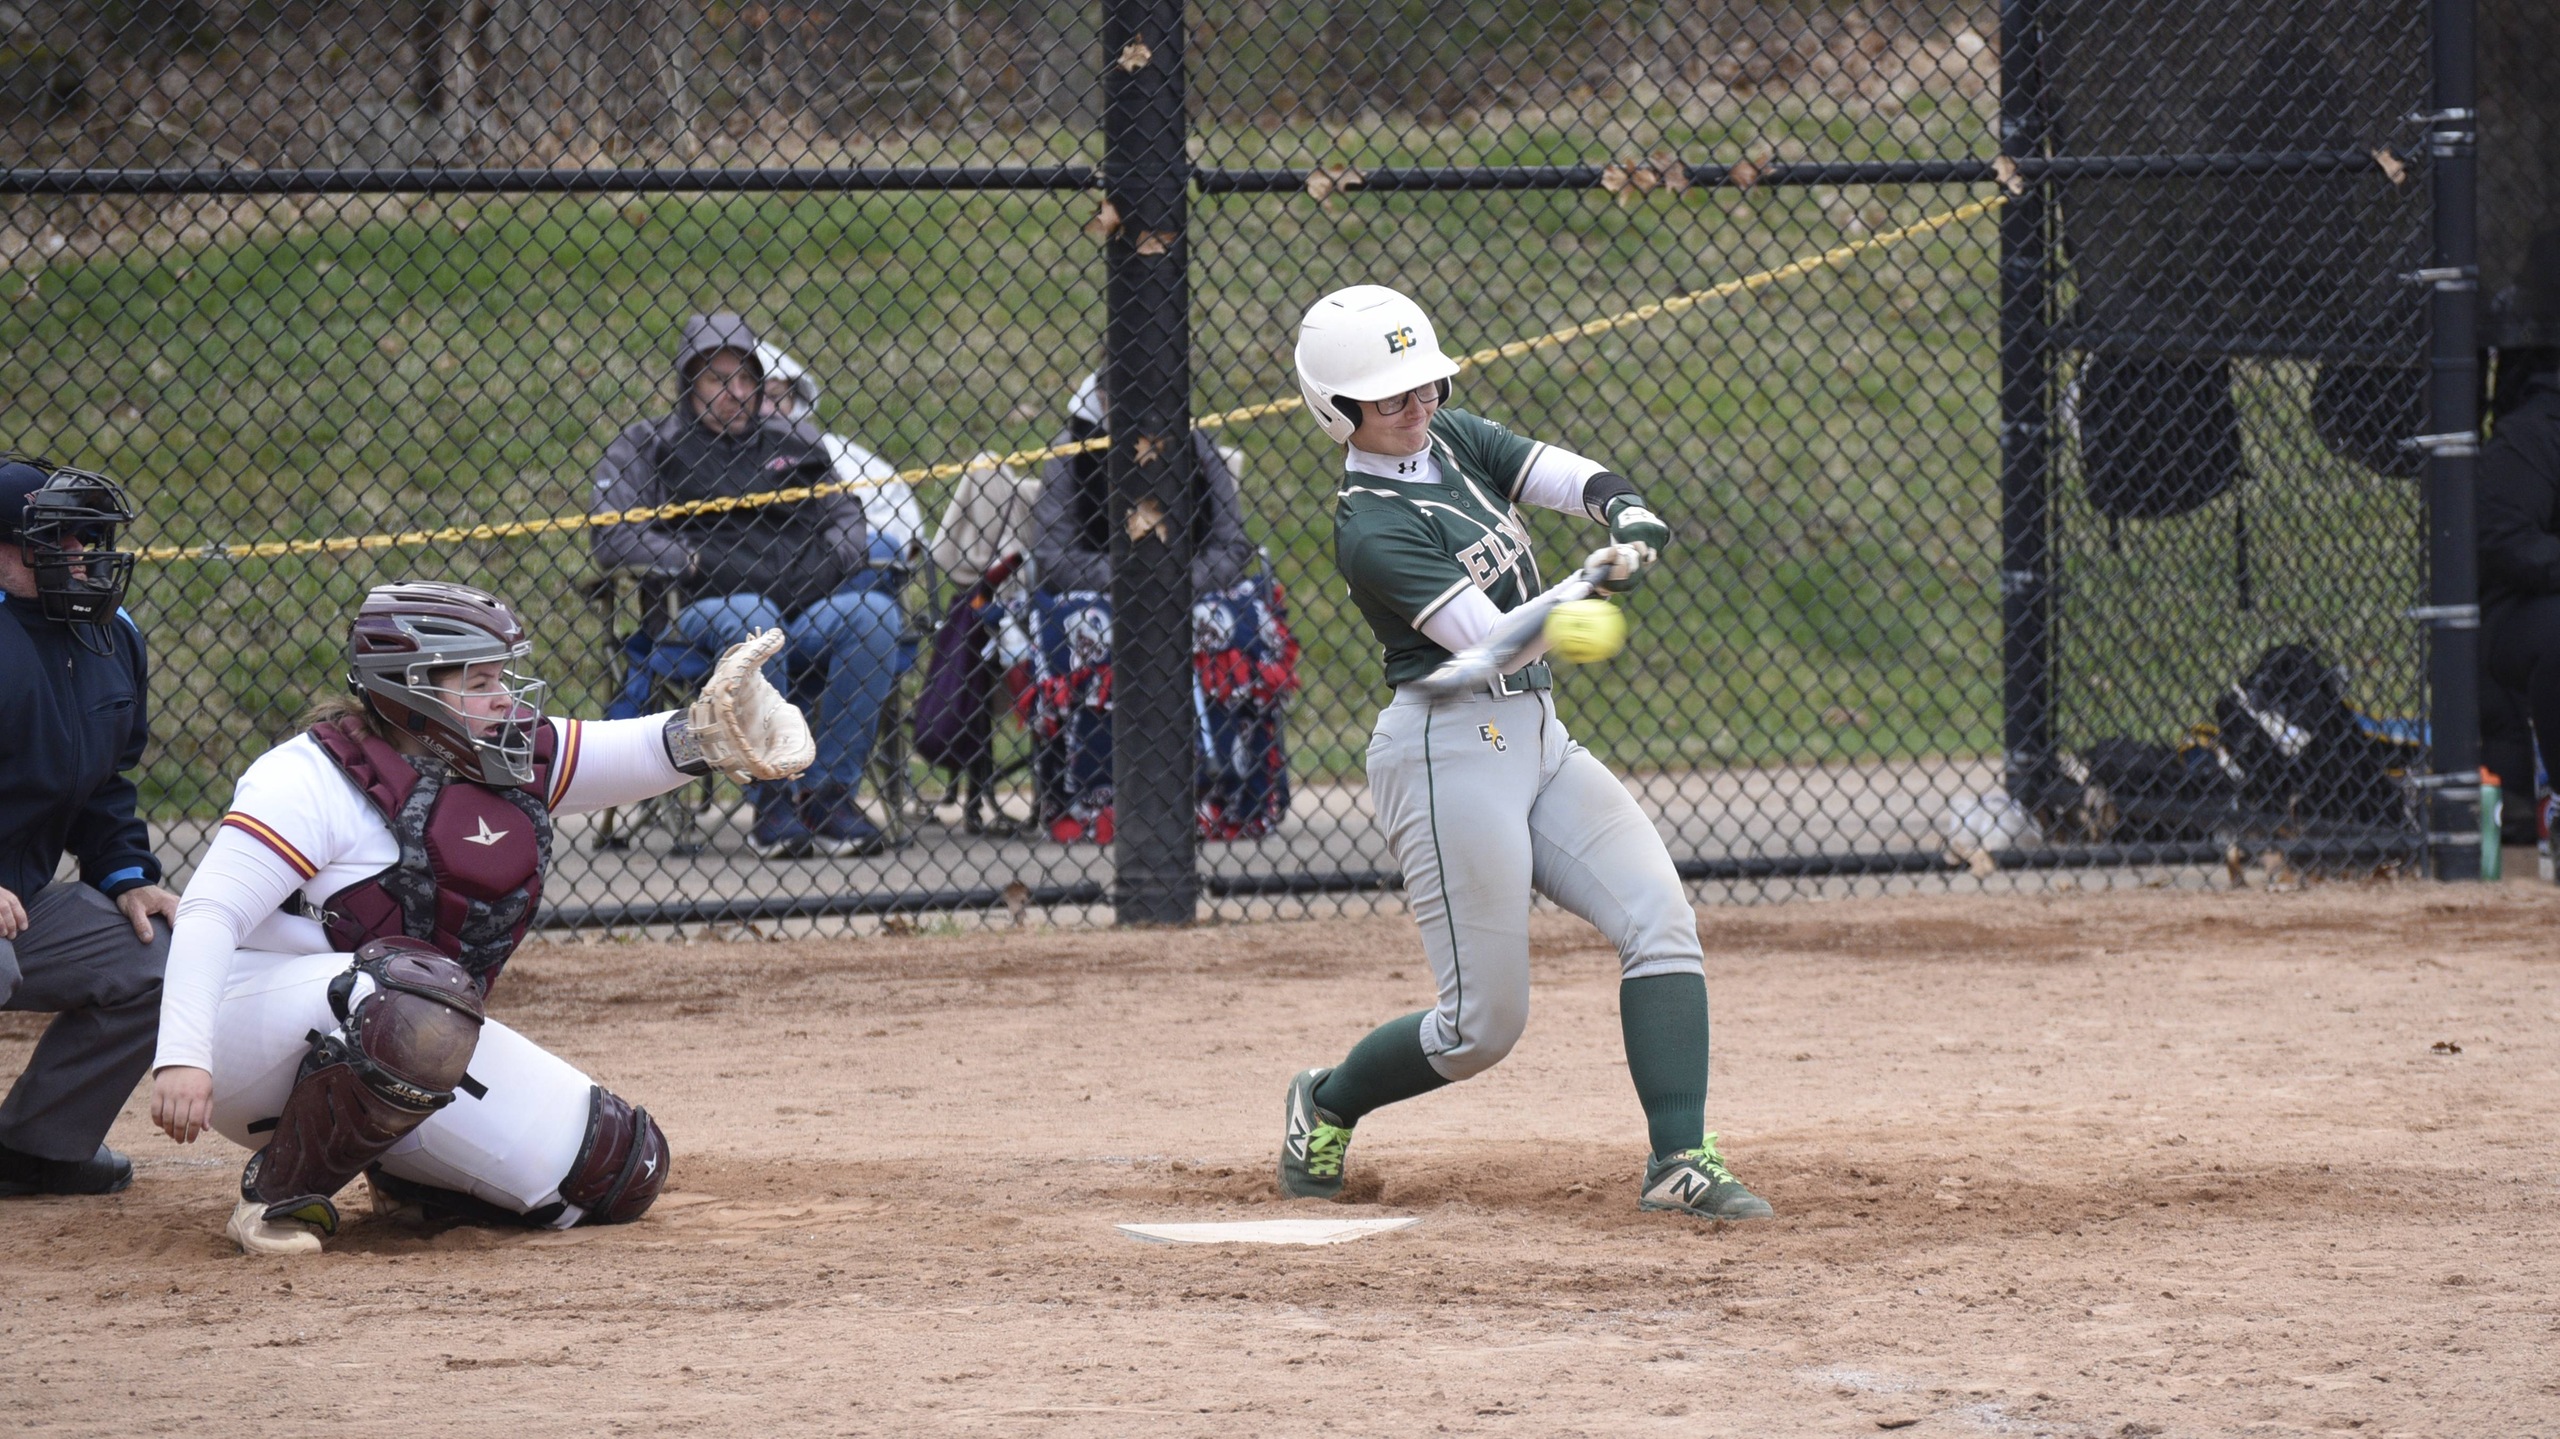 Softball Wraps Up Their Patriots Day Weekend Trip at Emmanuel